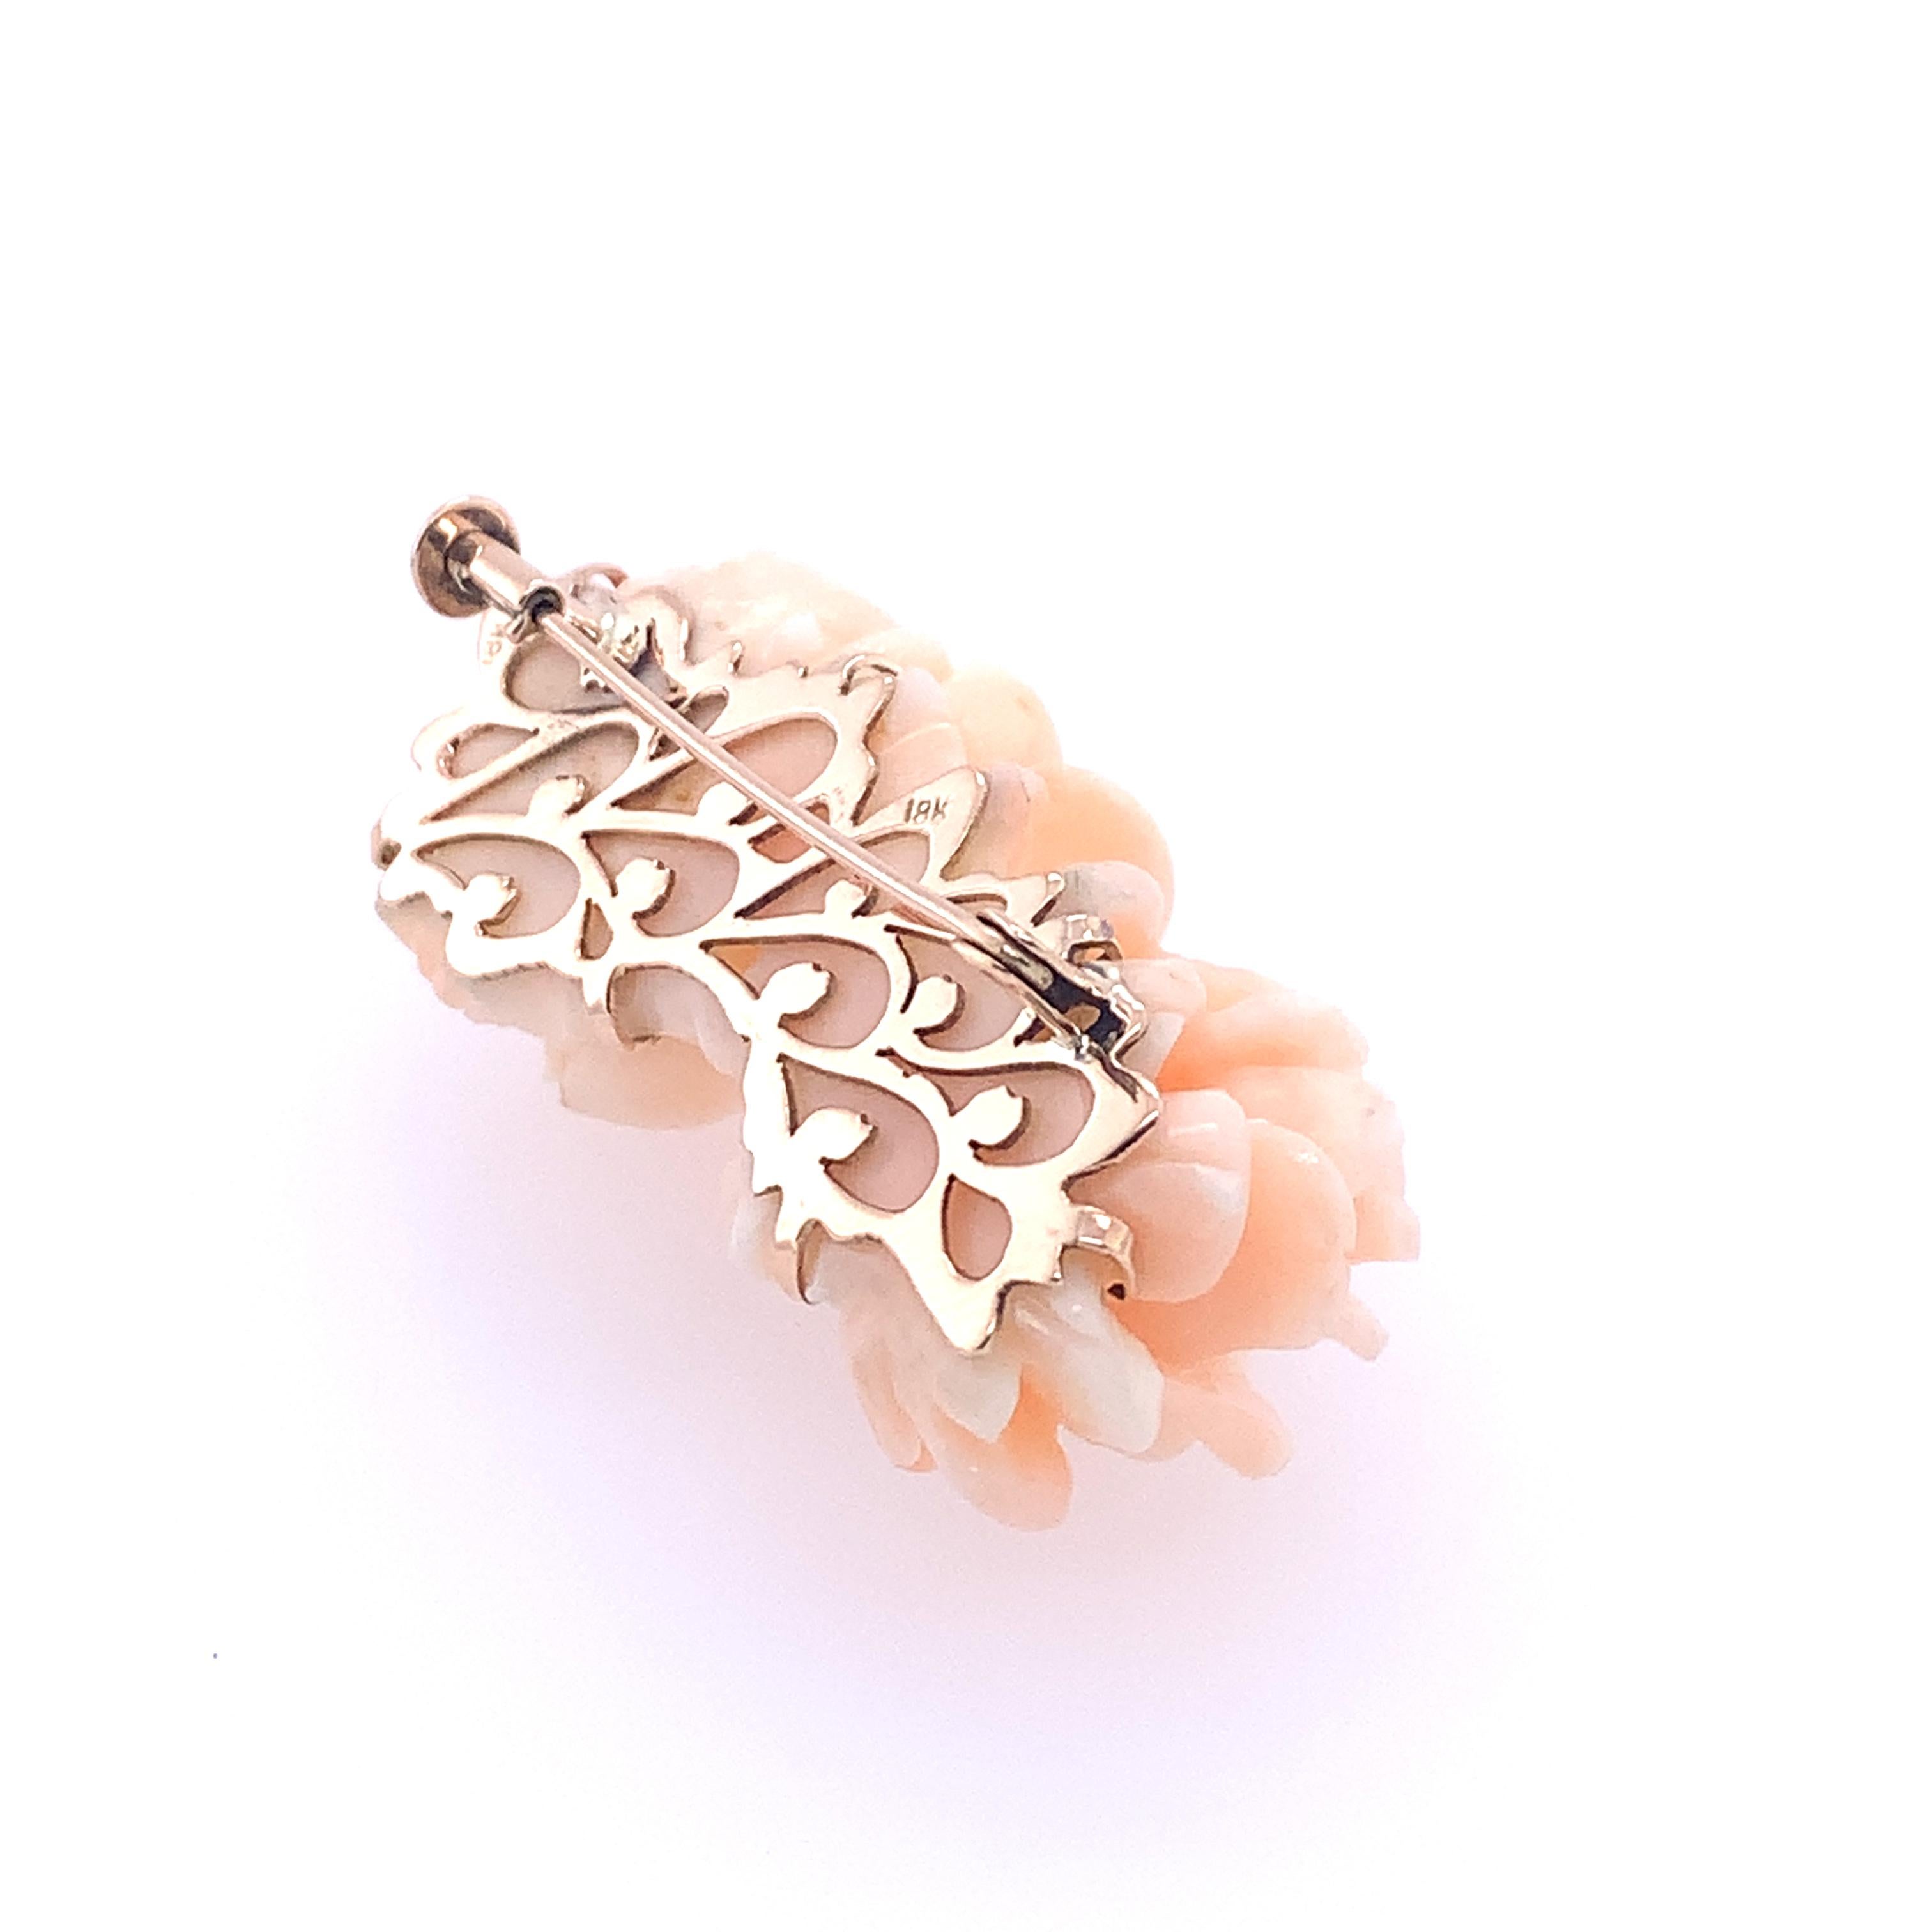 A vintage feminine angel skin coral brooch of two roses set in 18K rose gold. The hand carved roses are composed of a single piece of textured angel skin coral. on a handmade foliate designed 18kt rose gold plate. It has several shades of pale and